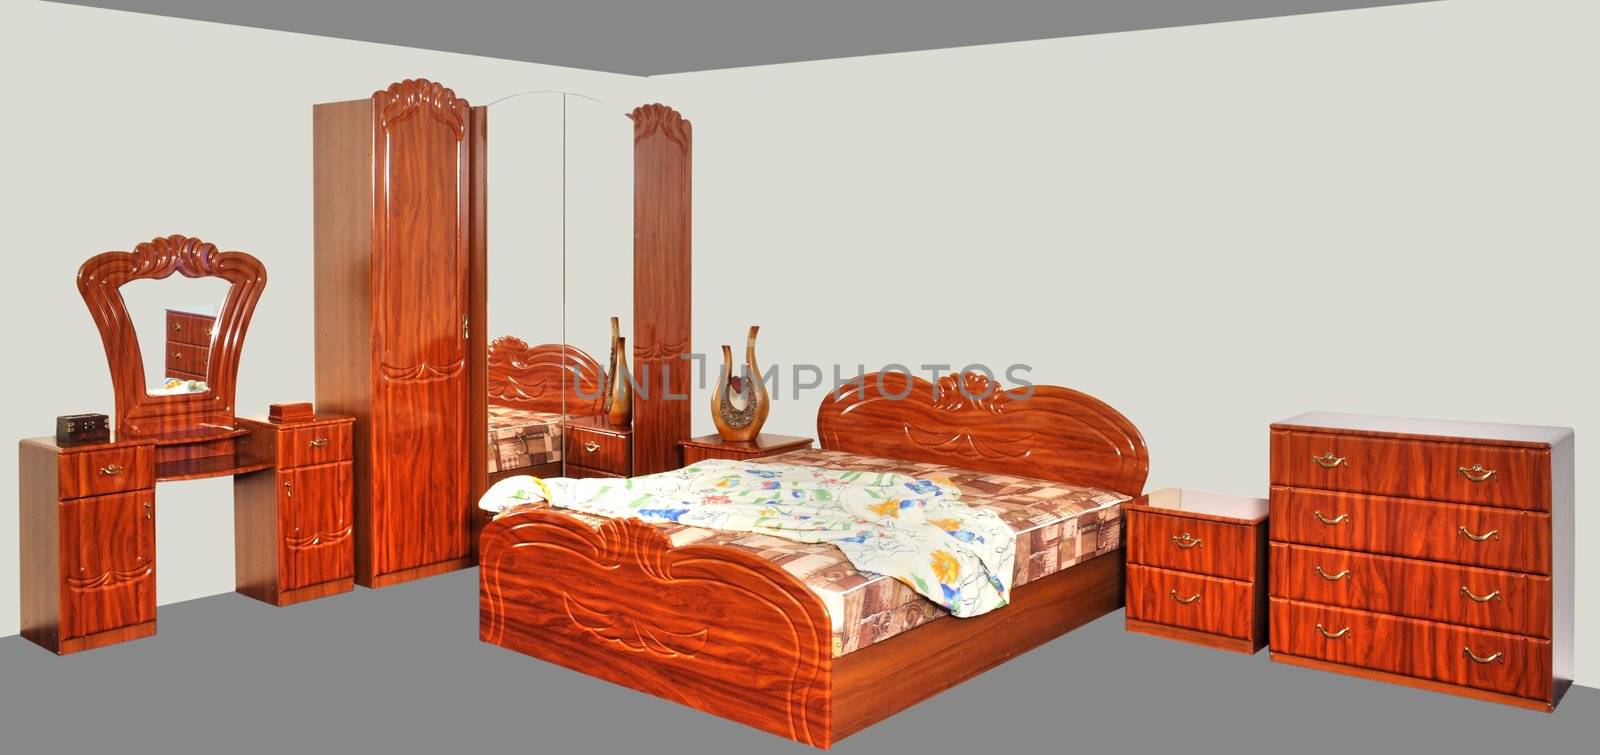 An image of bedroom with furniture